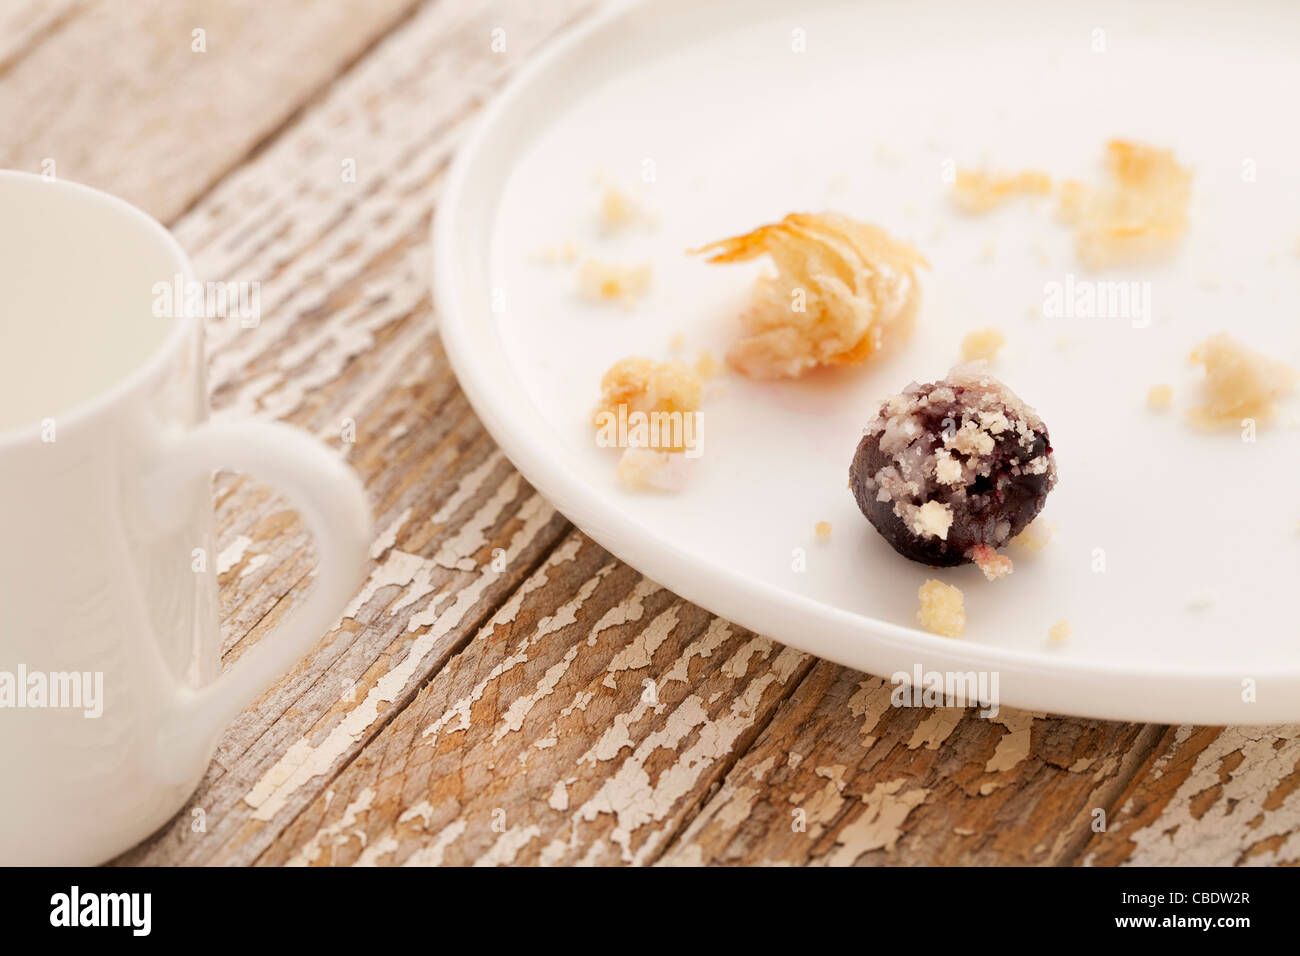 dessert gone - crumbs of cherry cheese danish pastry on white plate with espresso coffee cup on grunge wood table Stock Photo